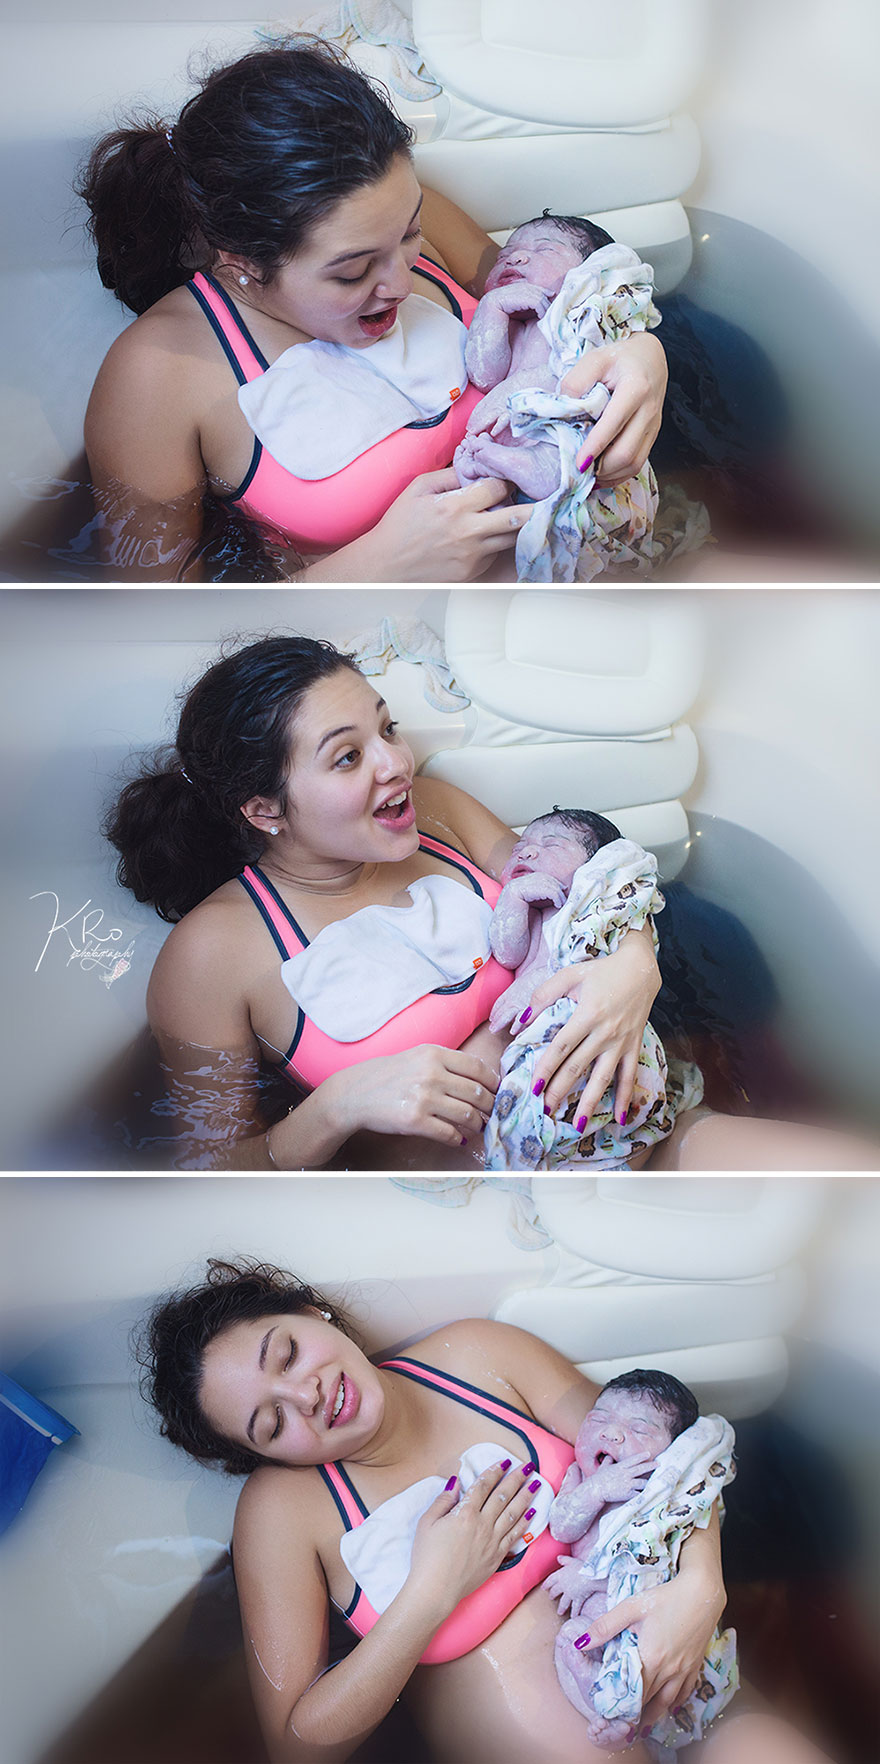 South-Florida-Photographer-Captures-All-Natural-Home-Water-Birth5__880 (2)